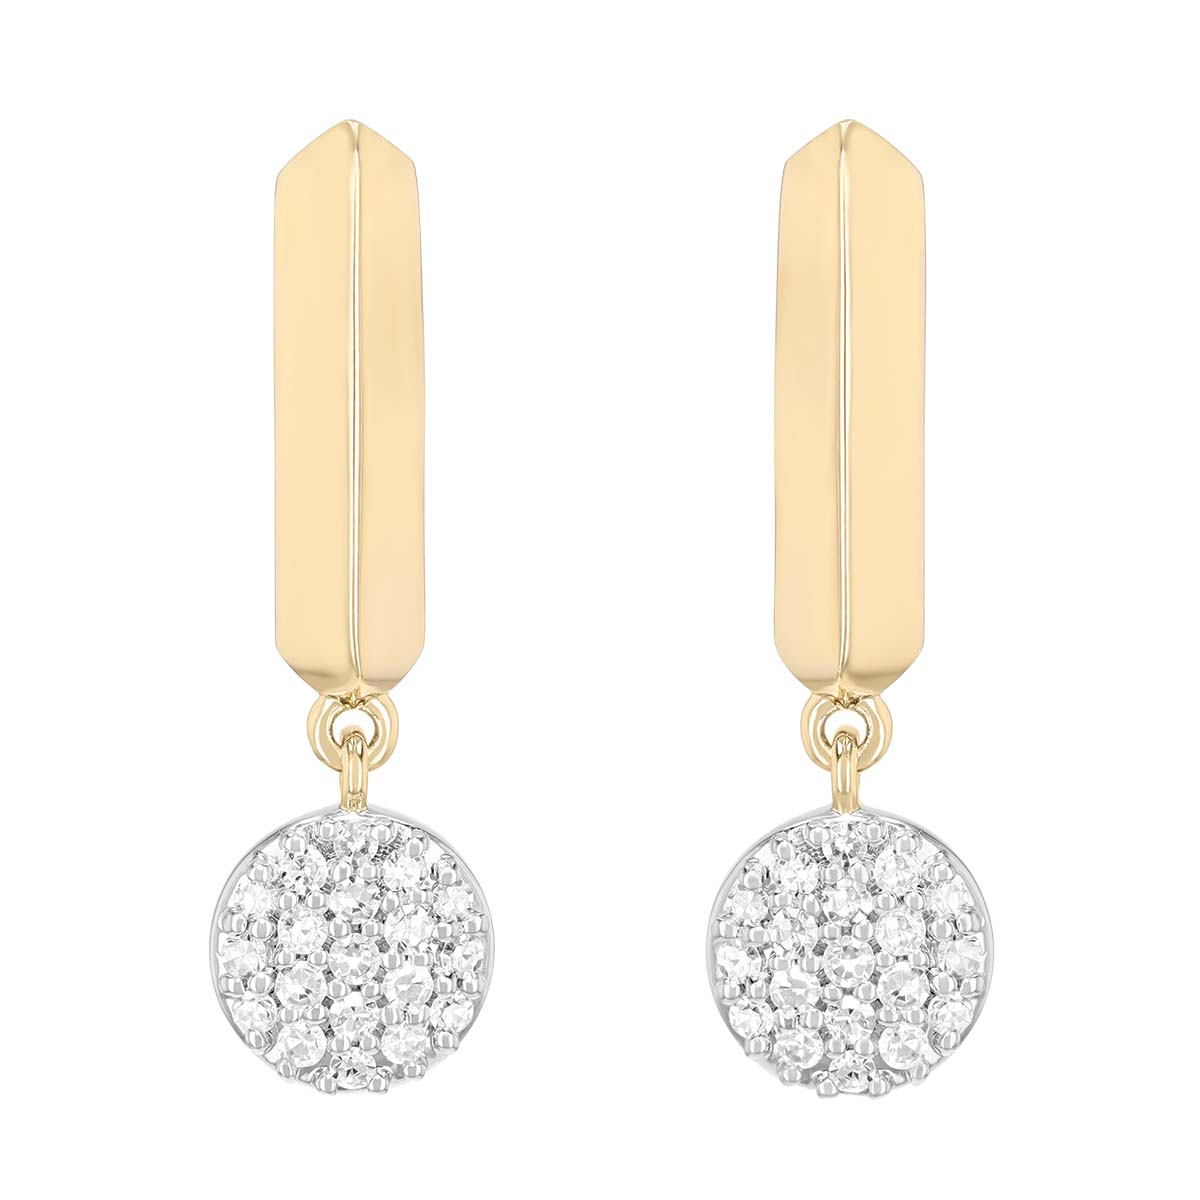 Forever Facets Vertical Bar Earrings in Yellow Gold Over Sterling Silver,  Adult Female - Walmart.com